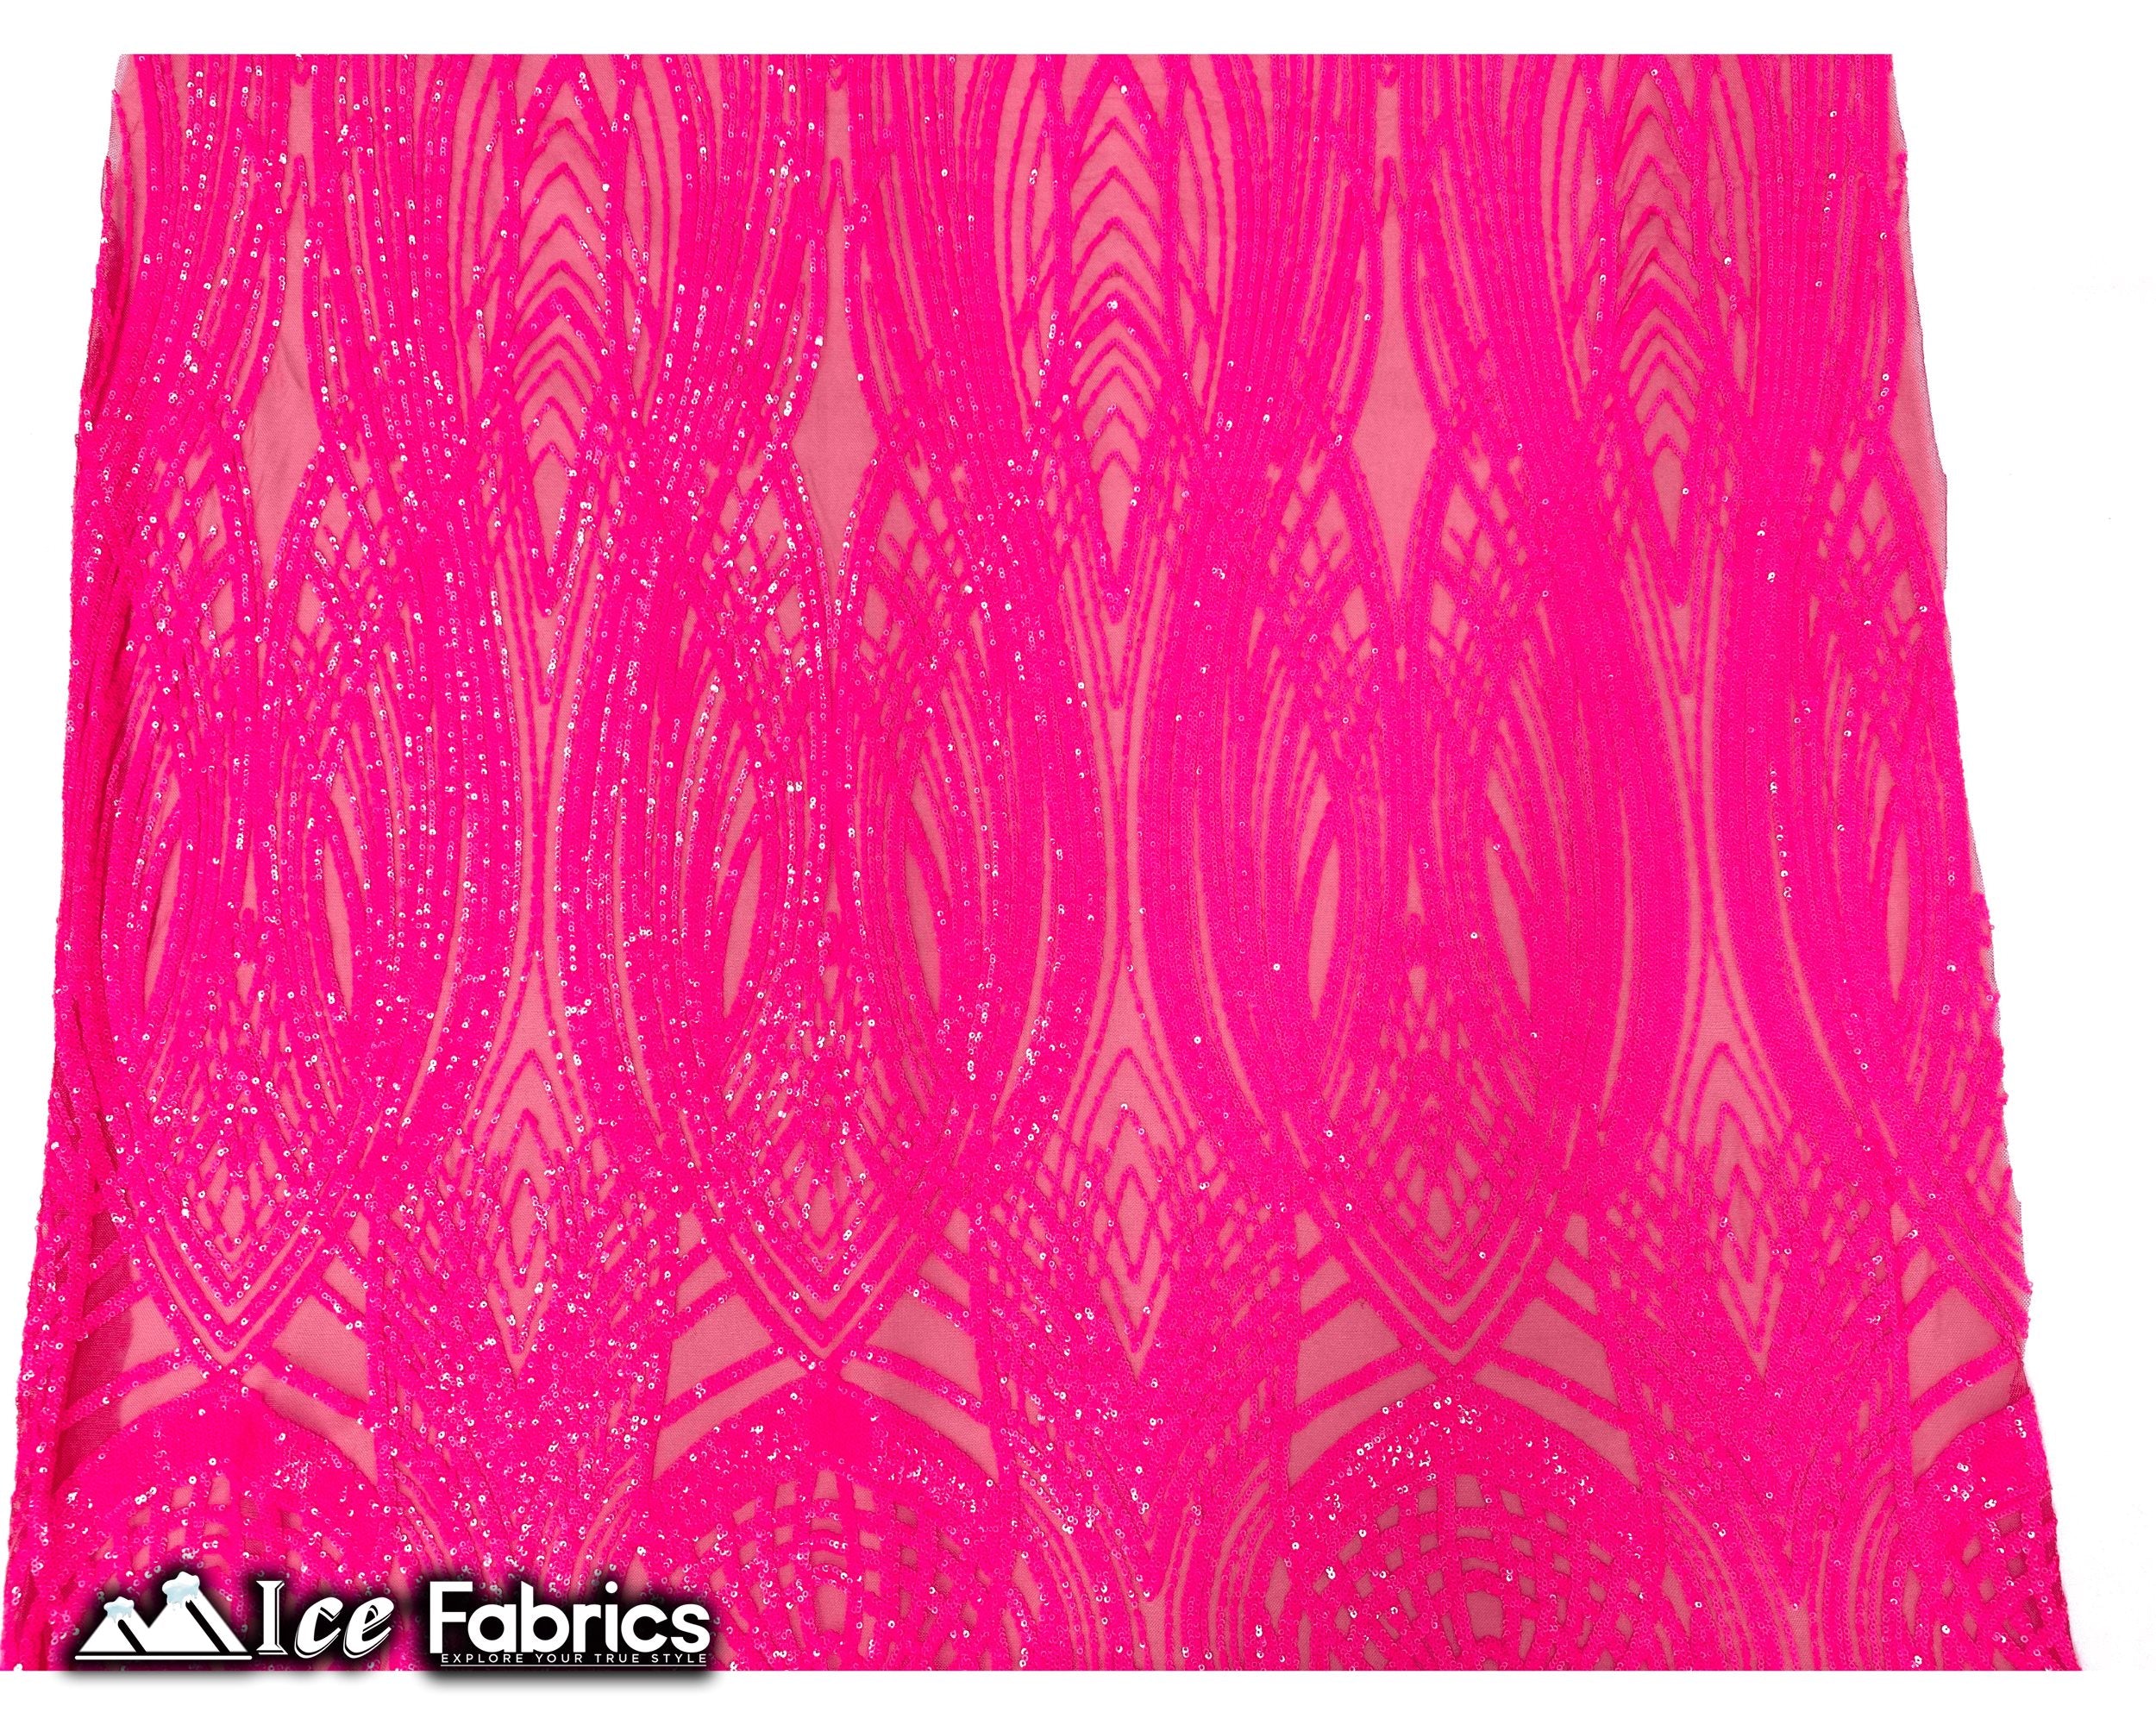 Peacock Sequin Fabric By The Yard 4 Way Stretch Spandex ICE FABRICS Neon Pink